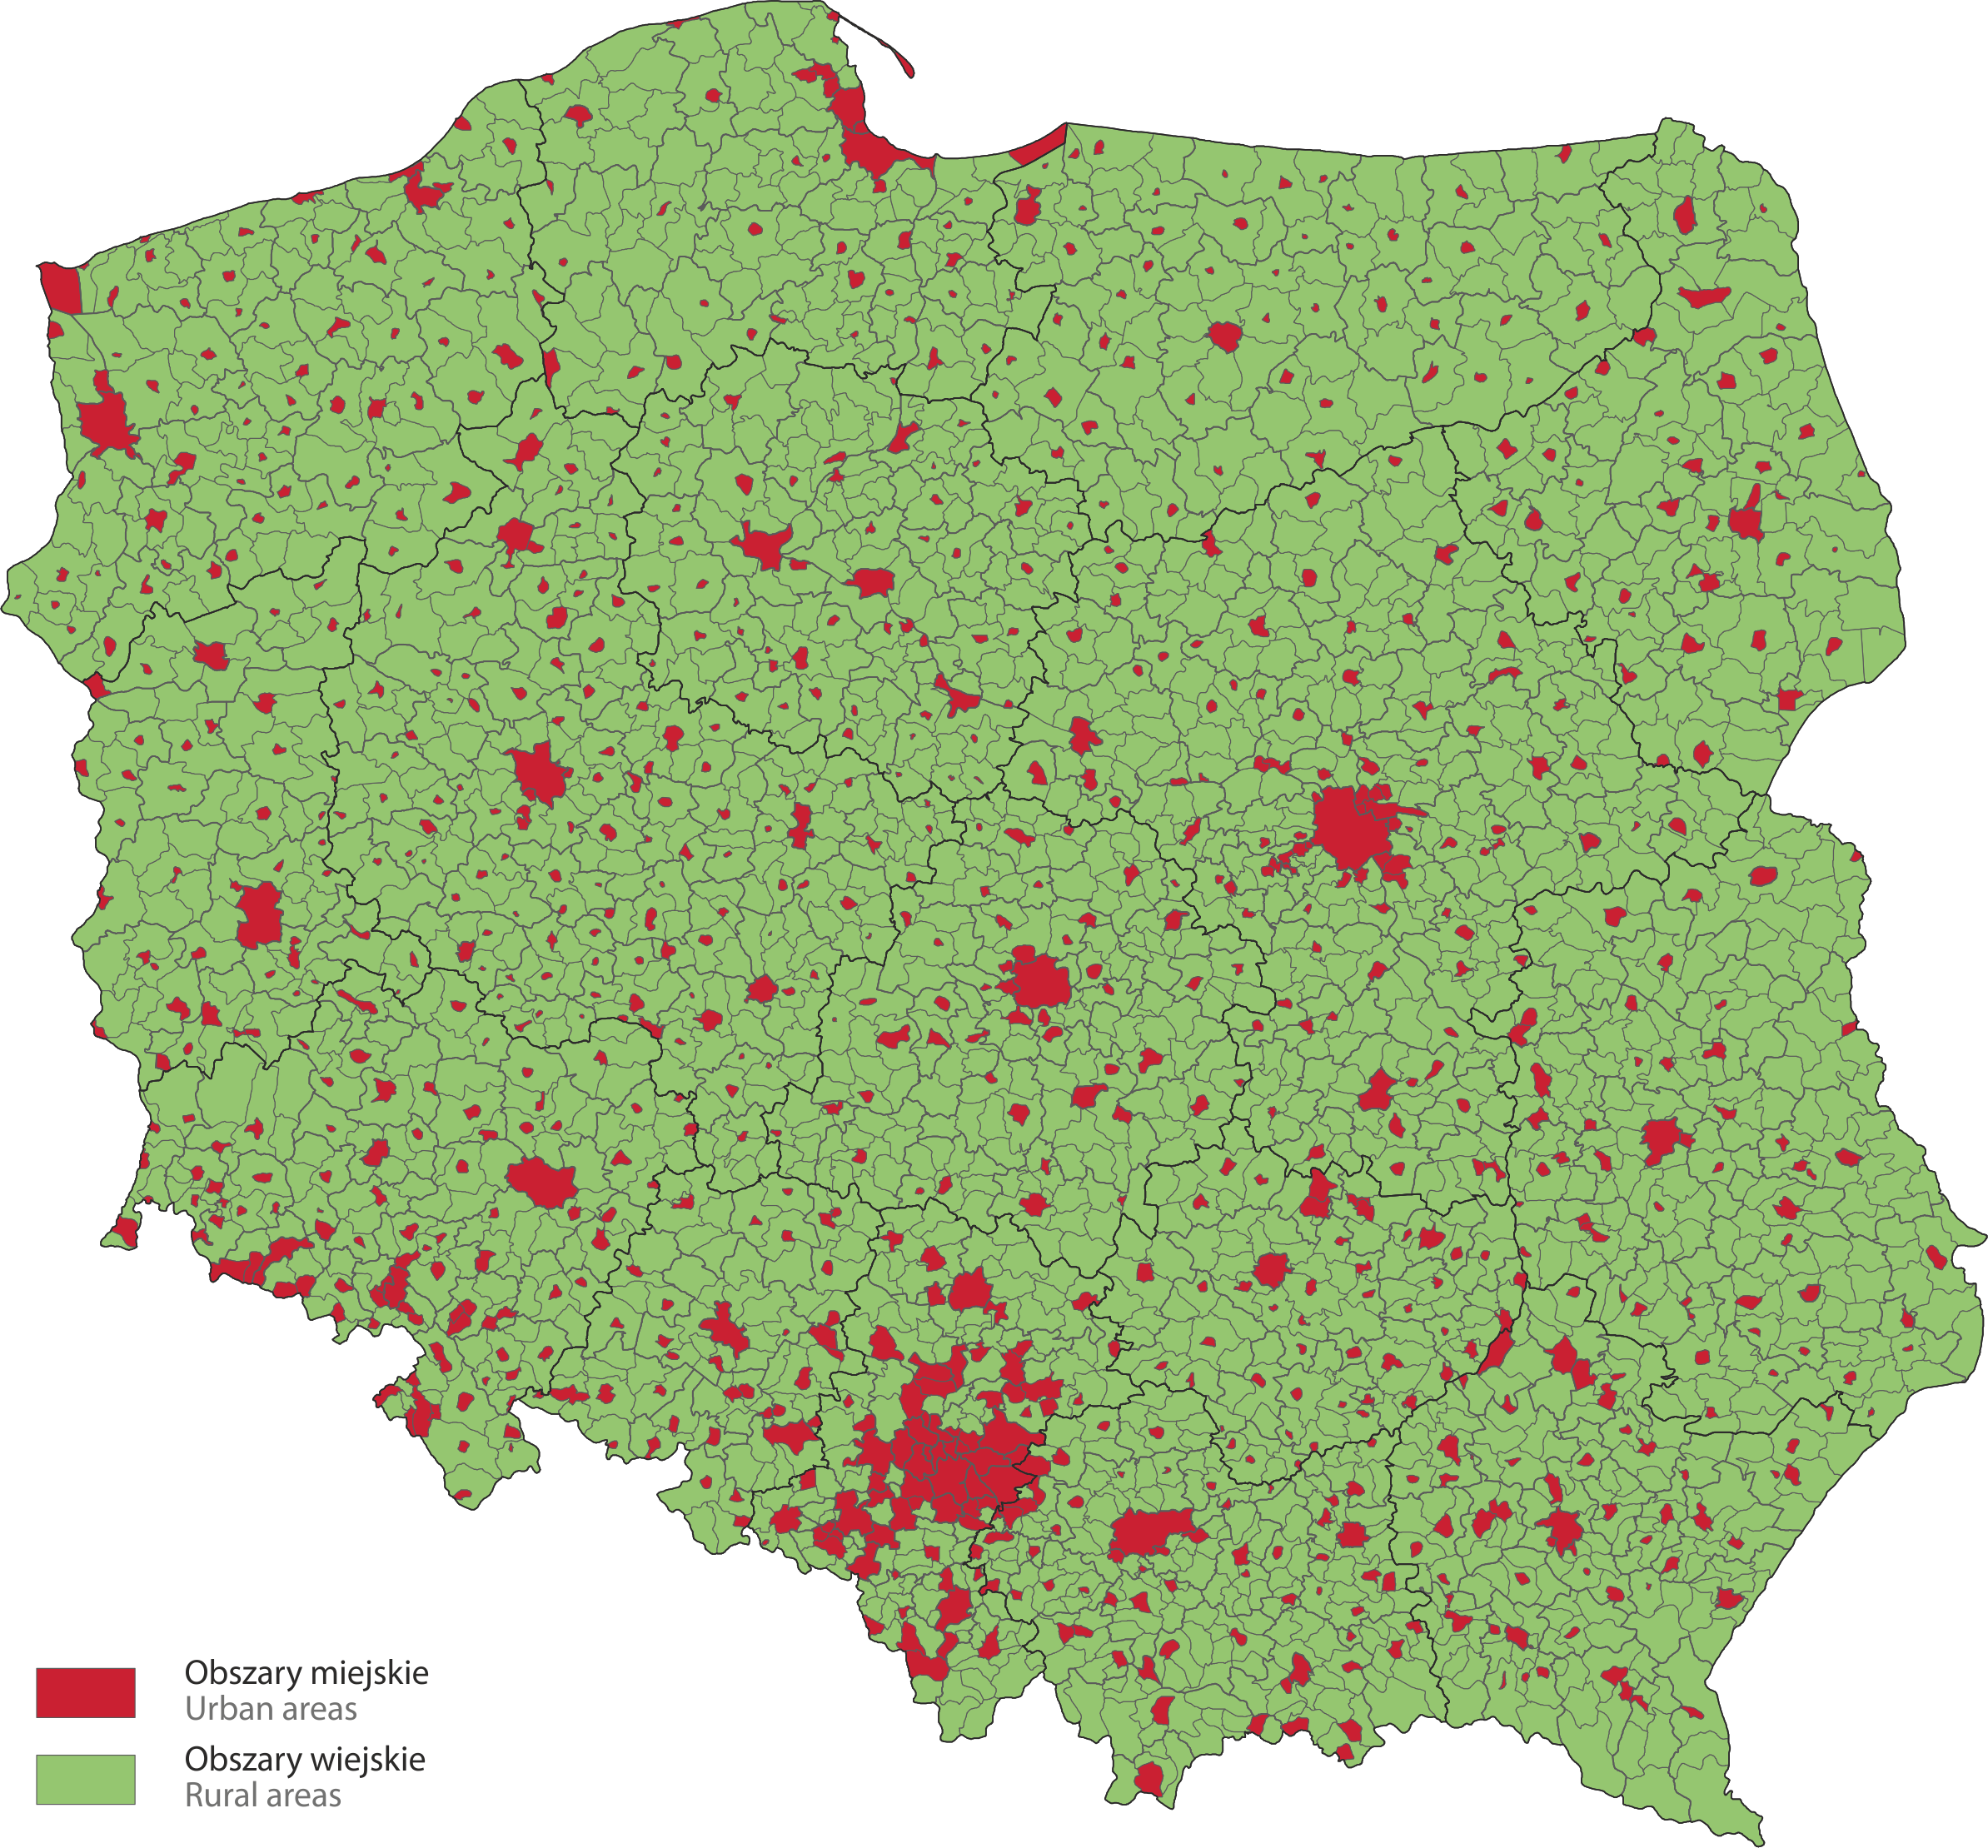 Urban and rural areas in Poland according to the TERYT register as of 1 January 2022